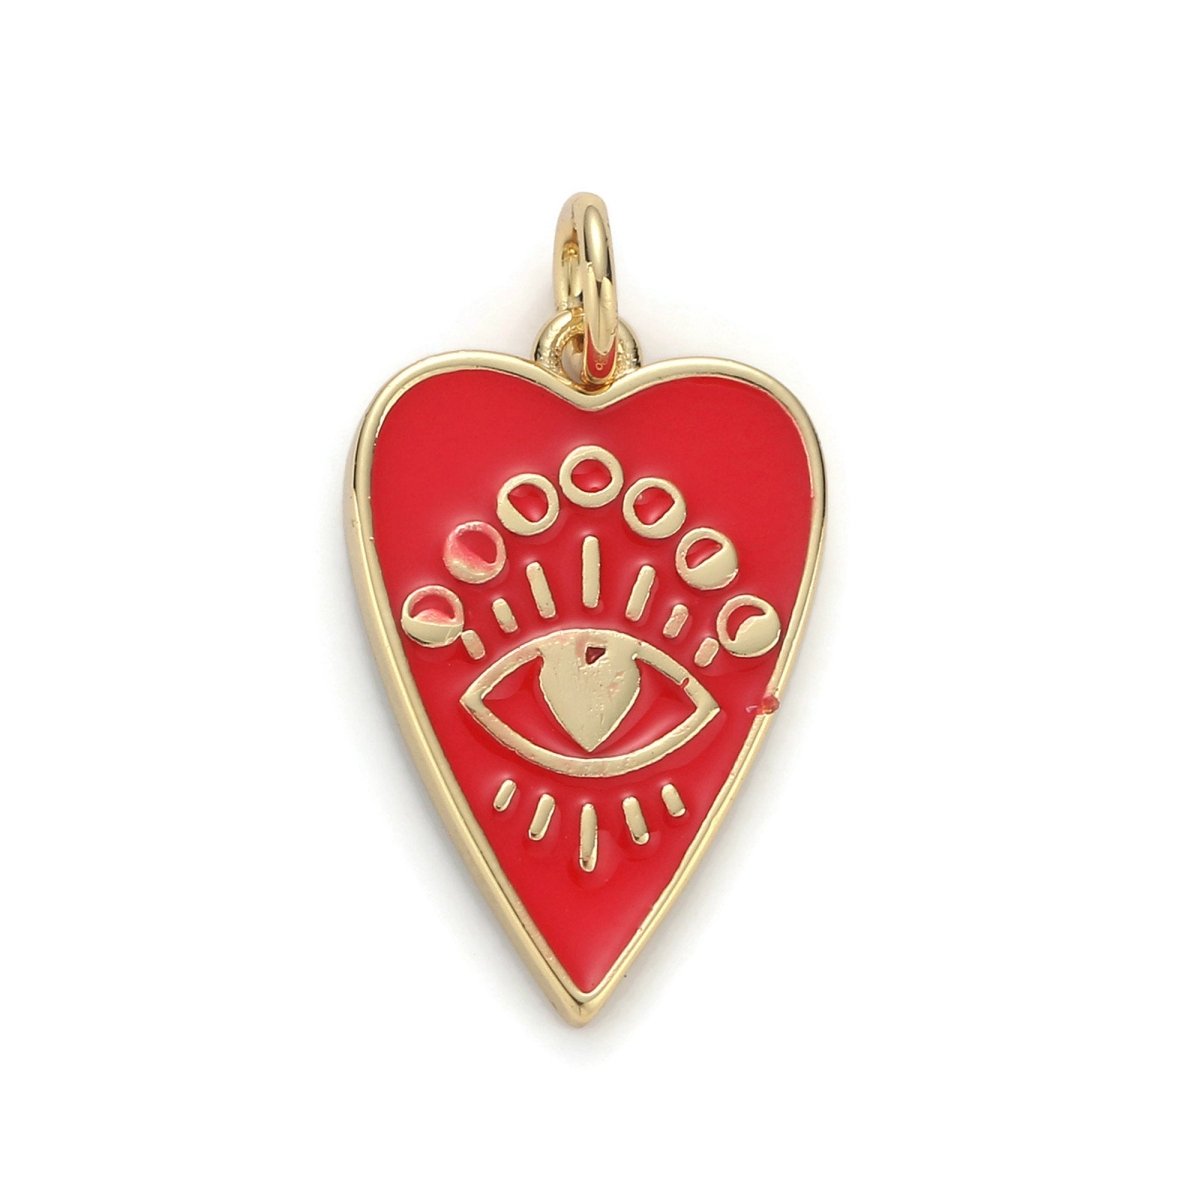 24k Gold Filled Heart Charm, Enamel Evil eye Pendant Charm, Pink Red Charm, For DIY Jewelry Necklace Supply D-164 - DLUXCA